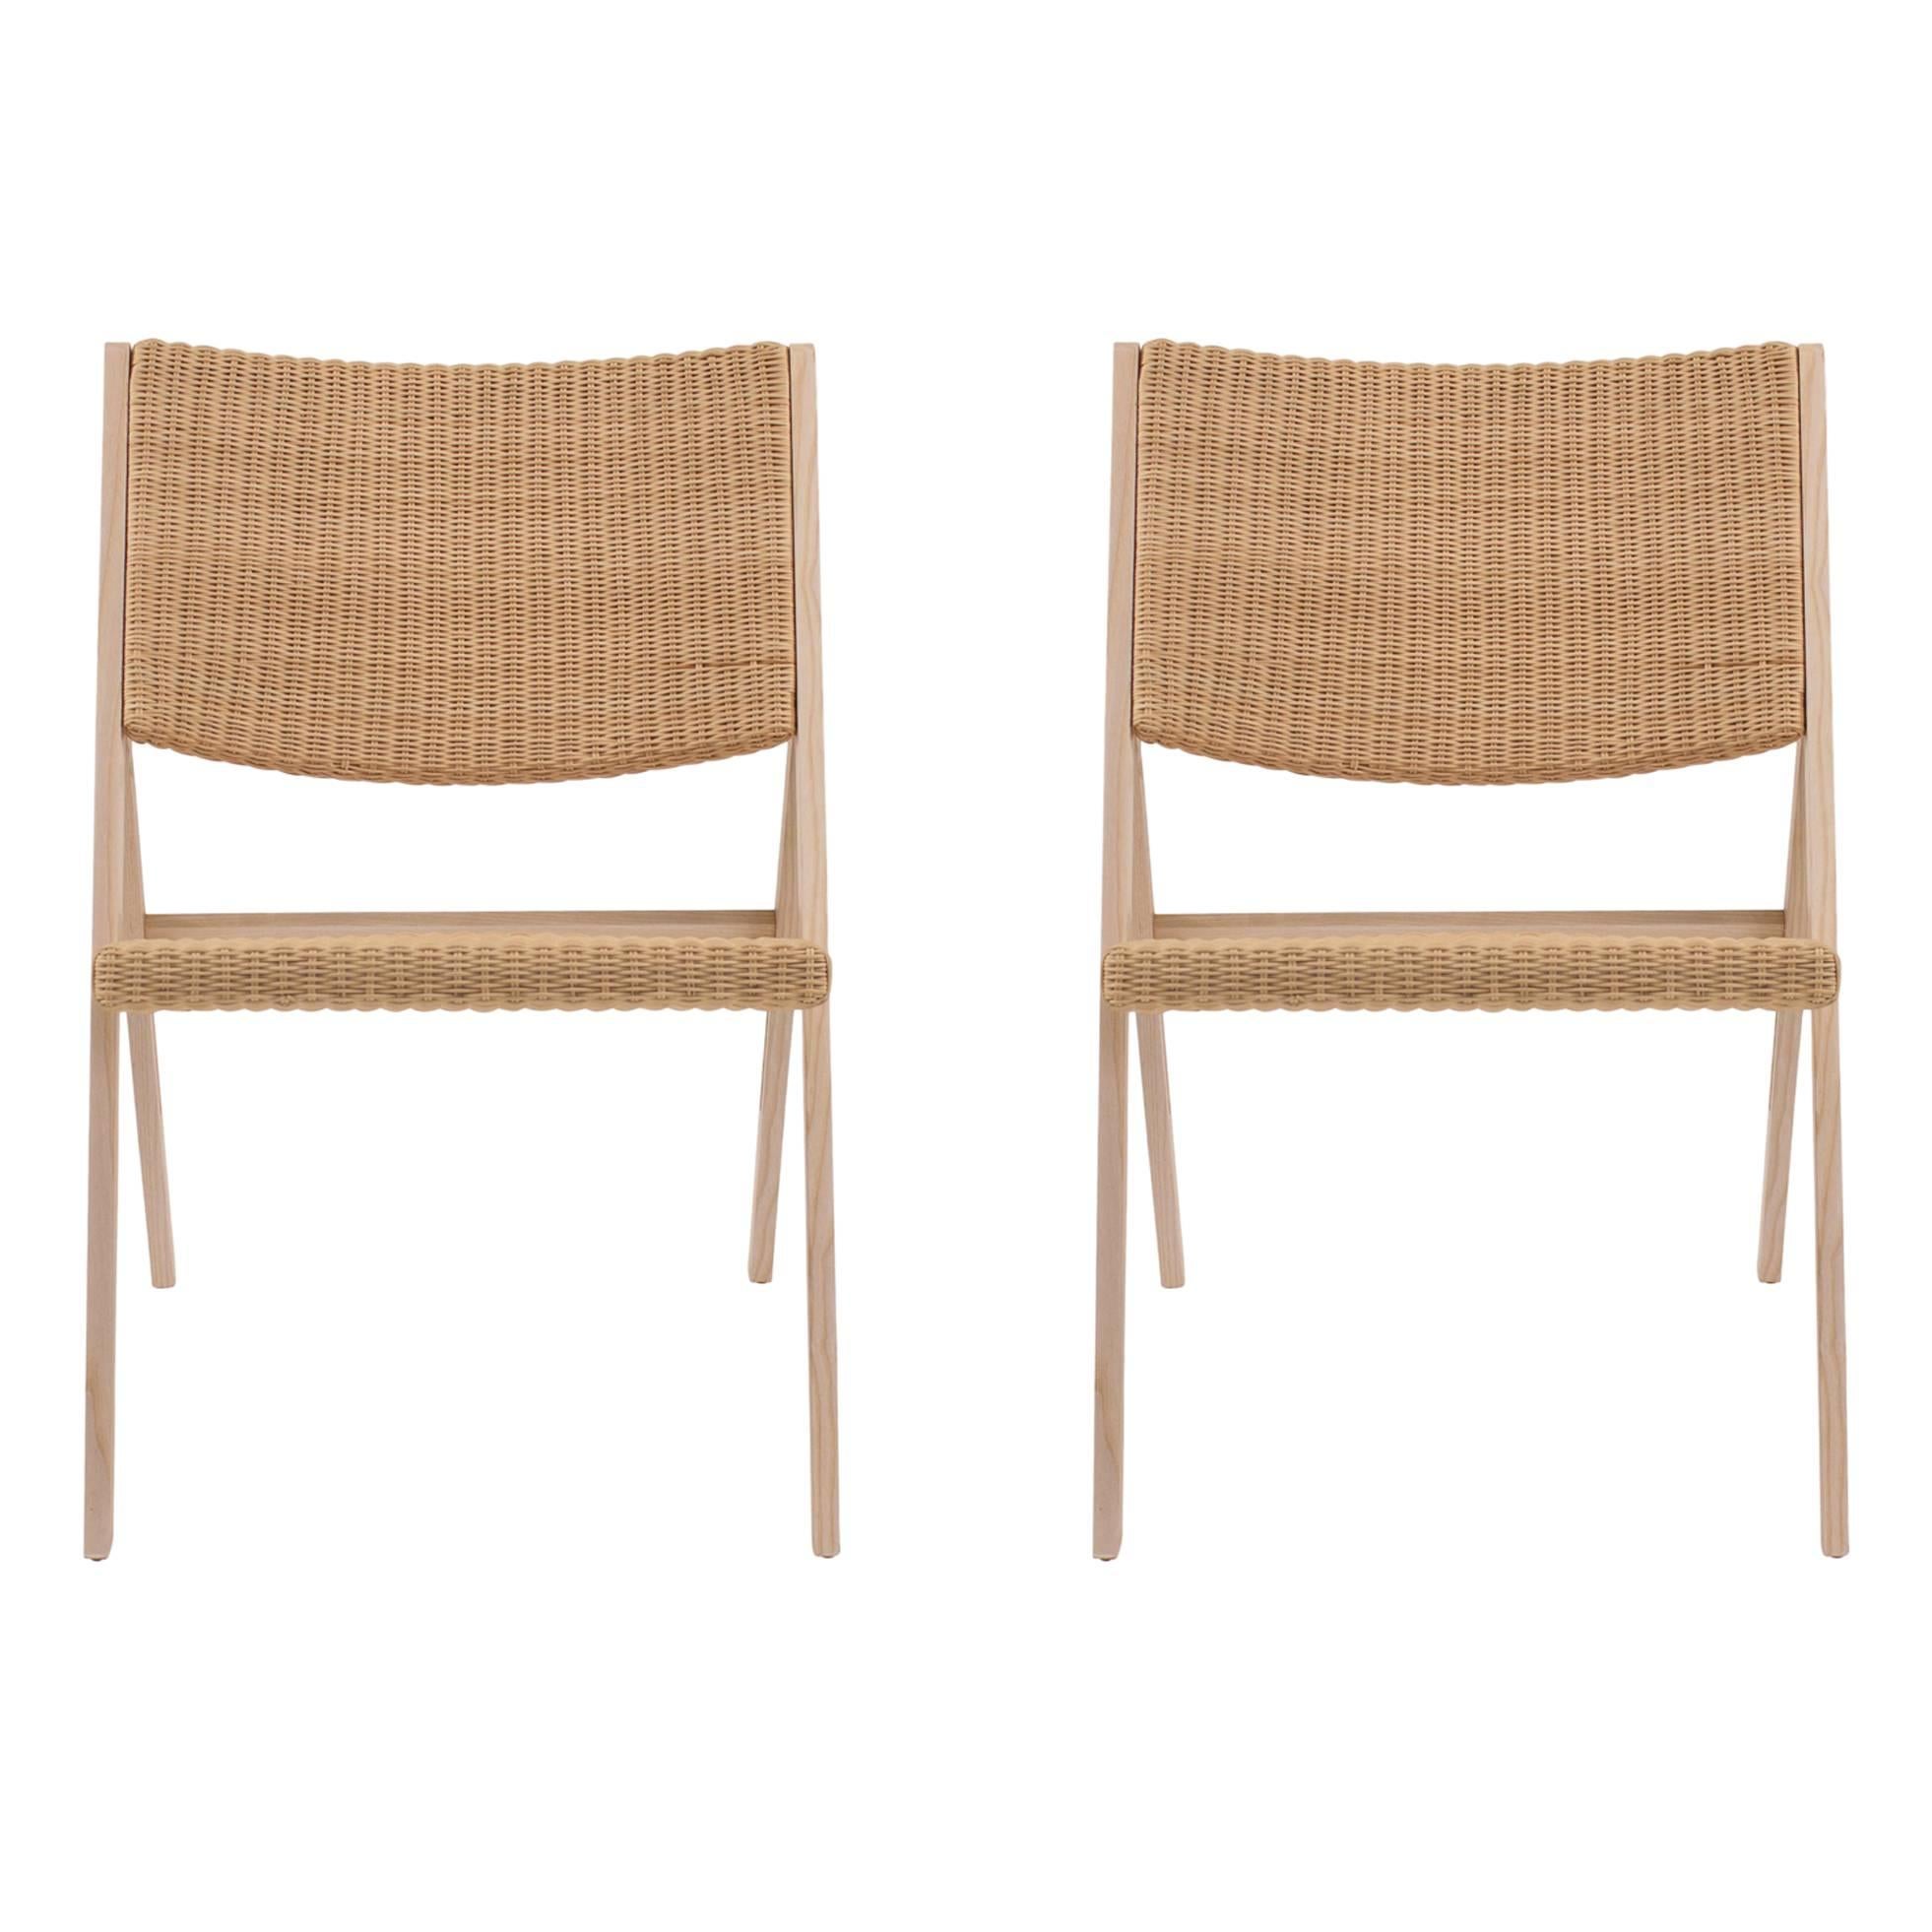 Wicker Folding Indoor Outdoor Chairs by Gio Ponti for Molteni, Italy For Sale